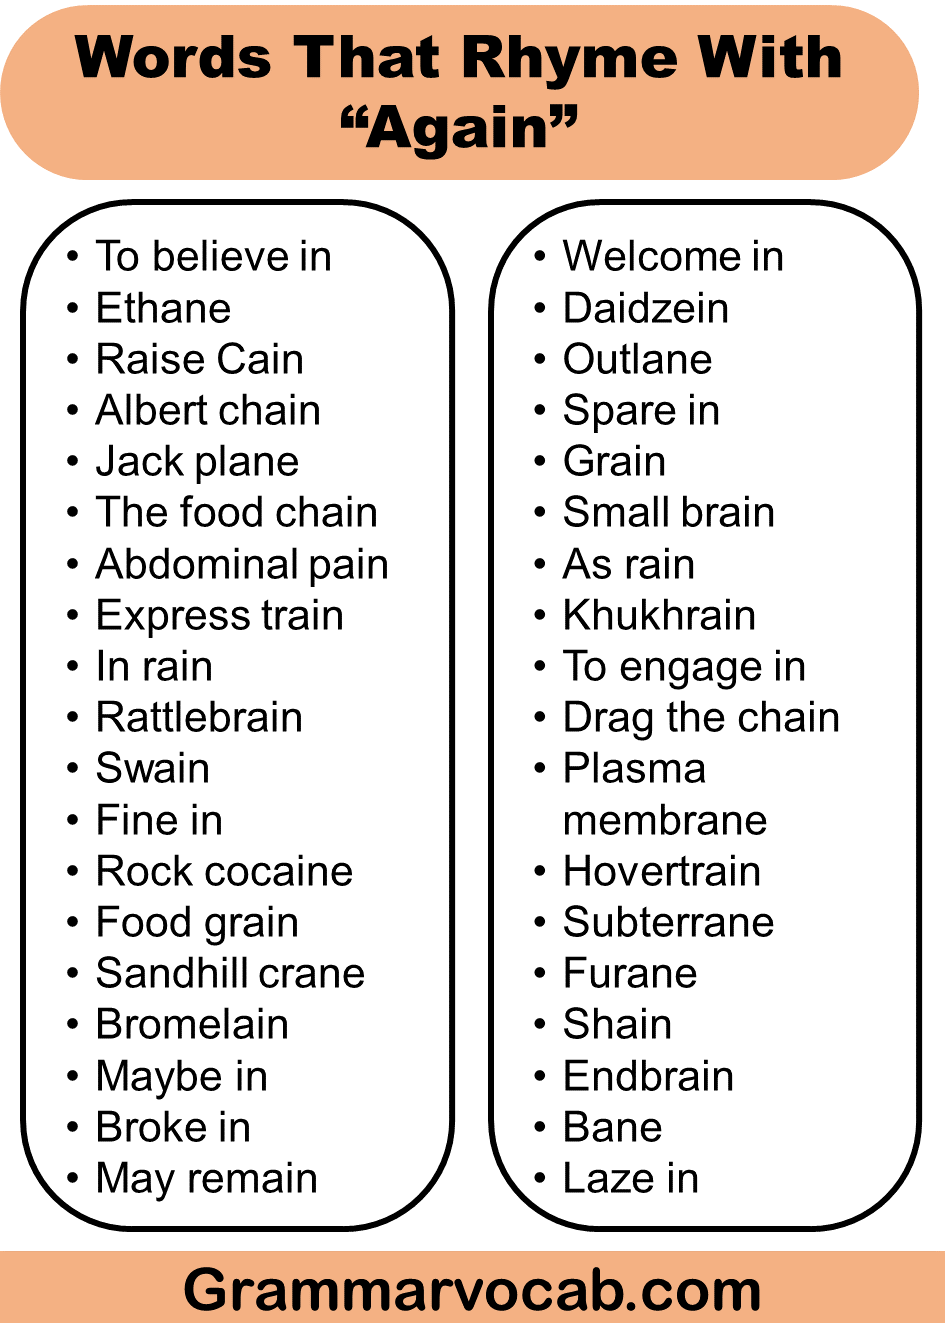 List of Words That Rhyme With Again